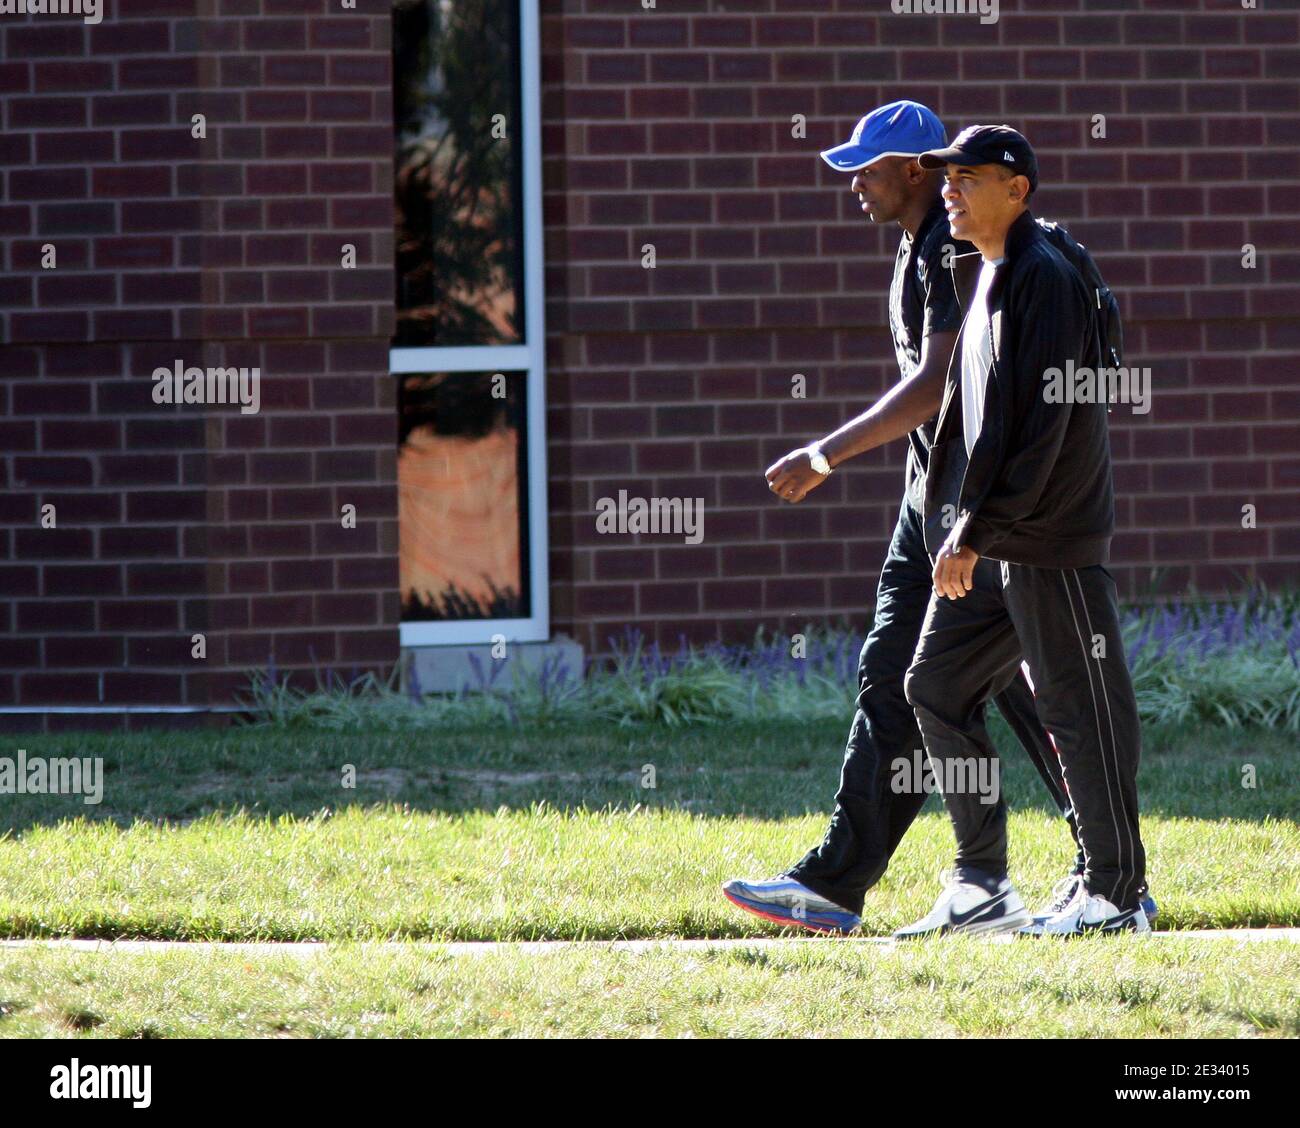 President Barack Obama walks with his personal aide, Reggie Love, as the two arrive at Fort Leslie J. McNair's athletic facility for a morning game of basketball in Washington, DC, USA on September 18, 2010. Photo by Martin H. Simon/ABACAPRESS.COM (Pictured: Barack Obama, Reggie Love) Stock Photo